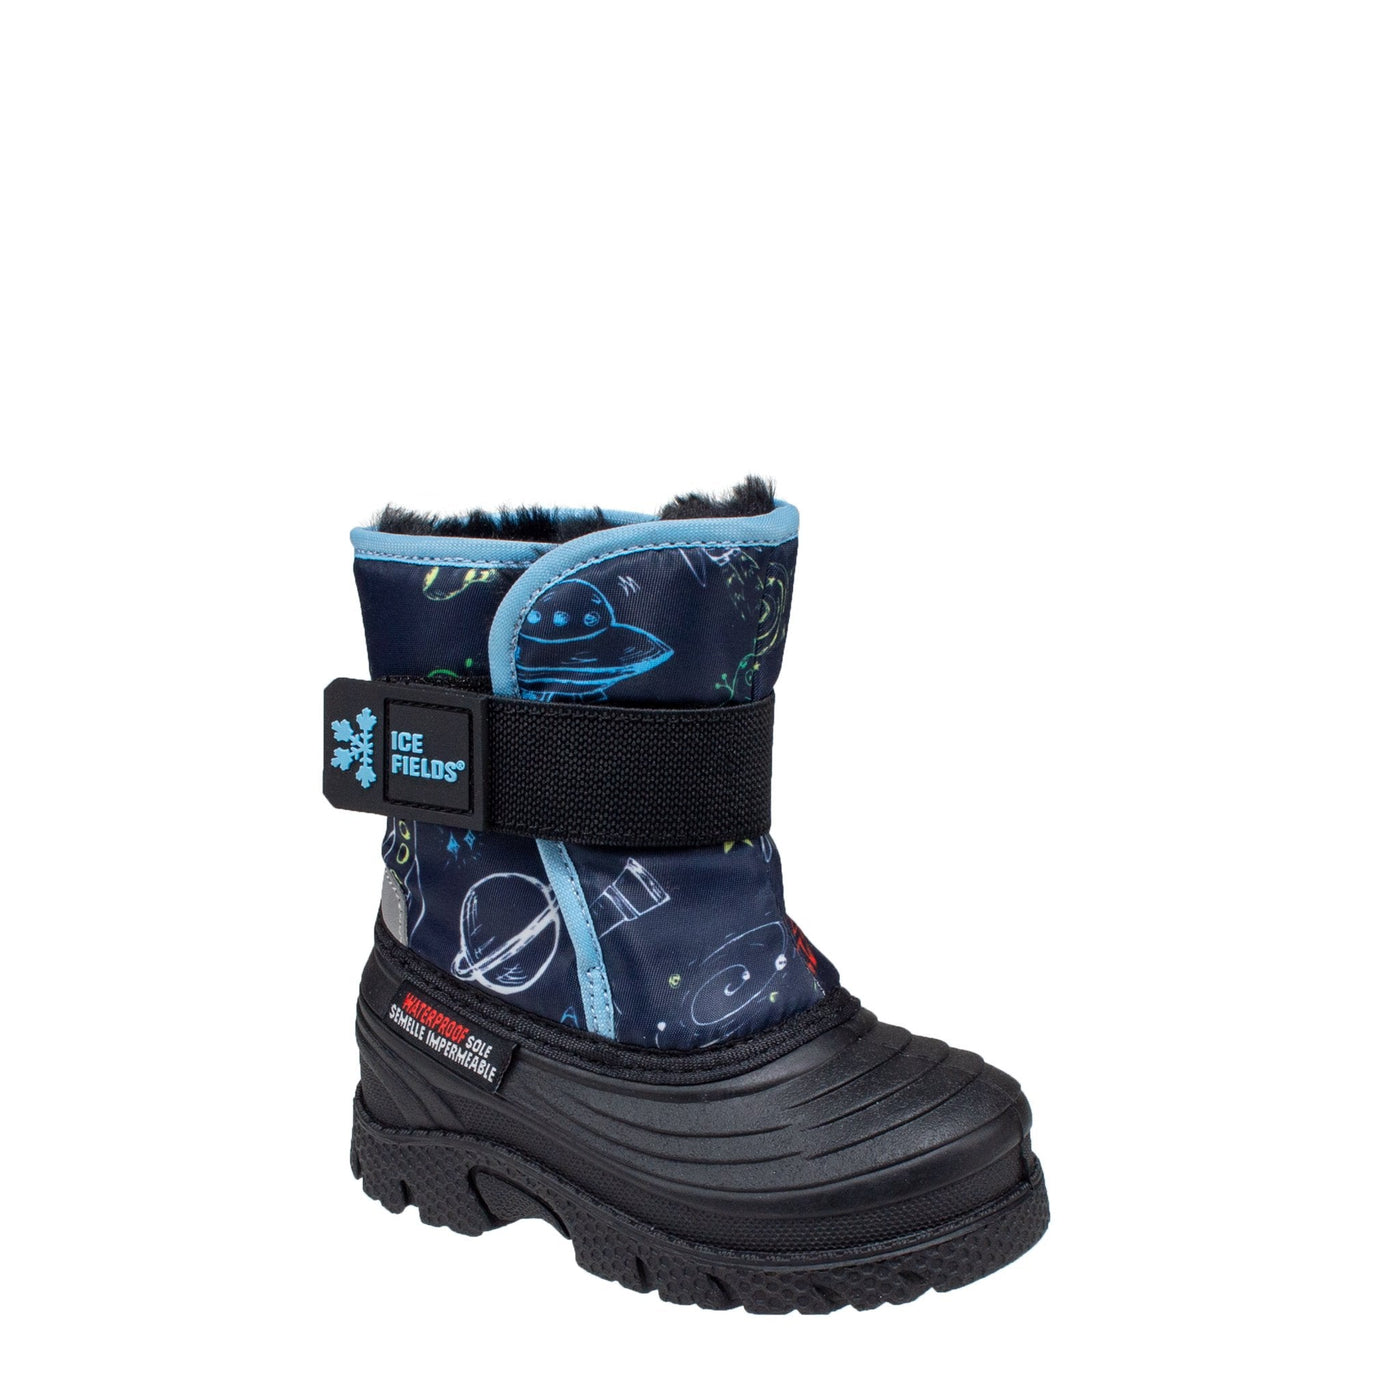 navy insulated waterproof infants boots #color_navy